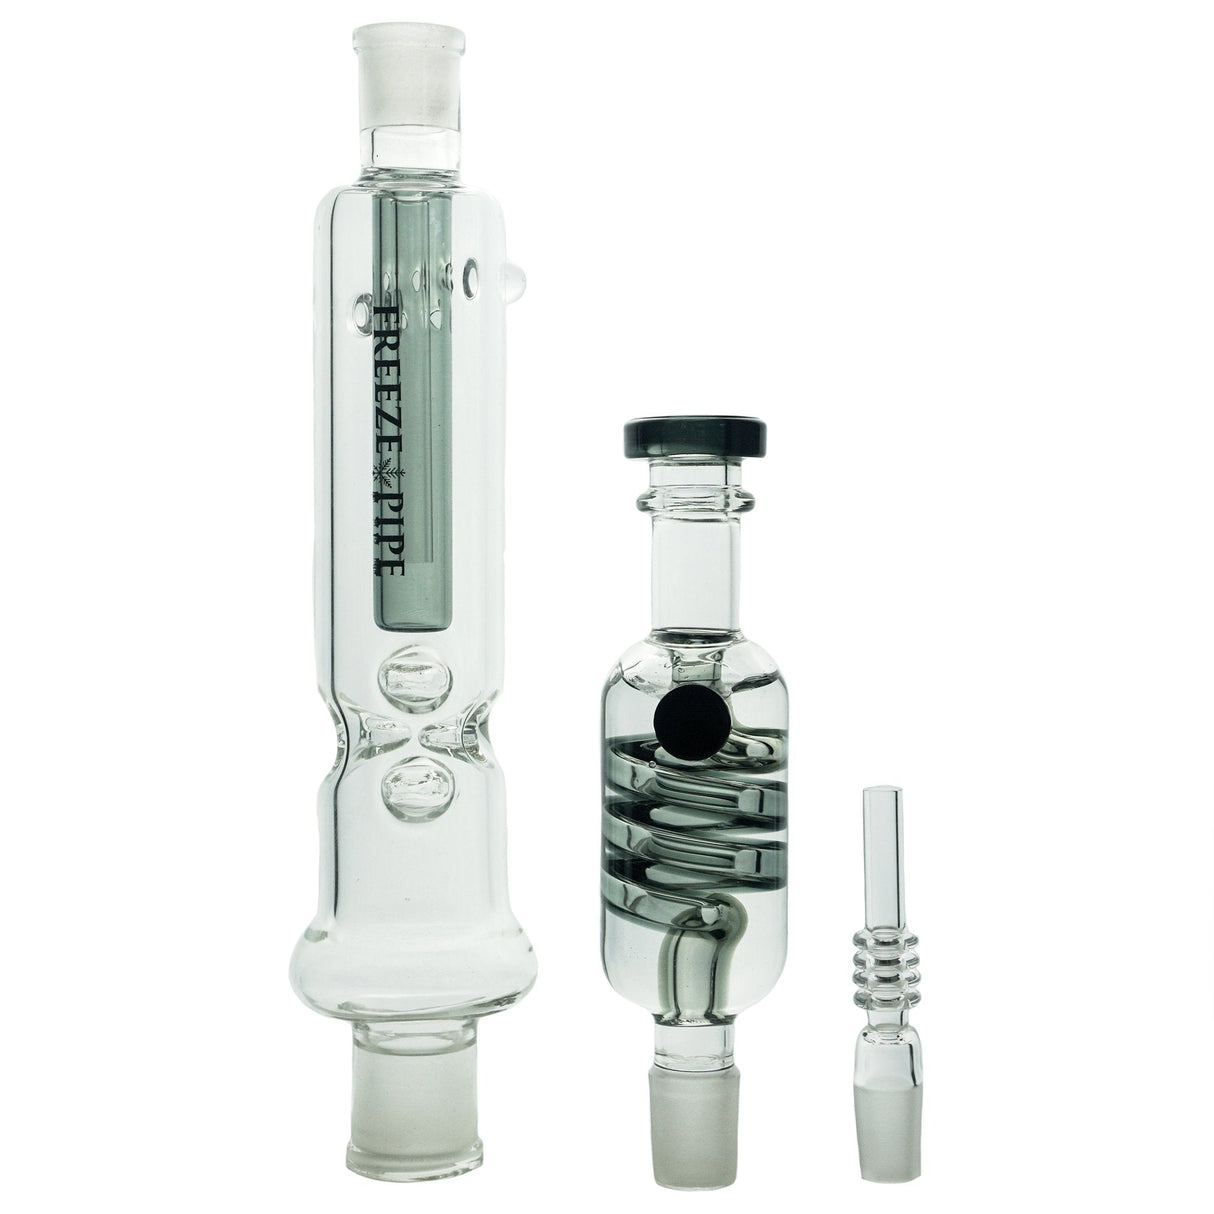 Freeze Pipe Nectar Collector Kit with metal body and glass attachments on white background